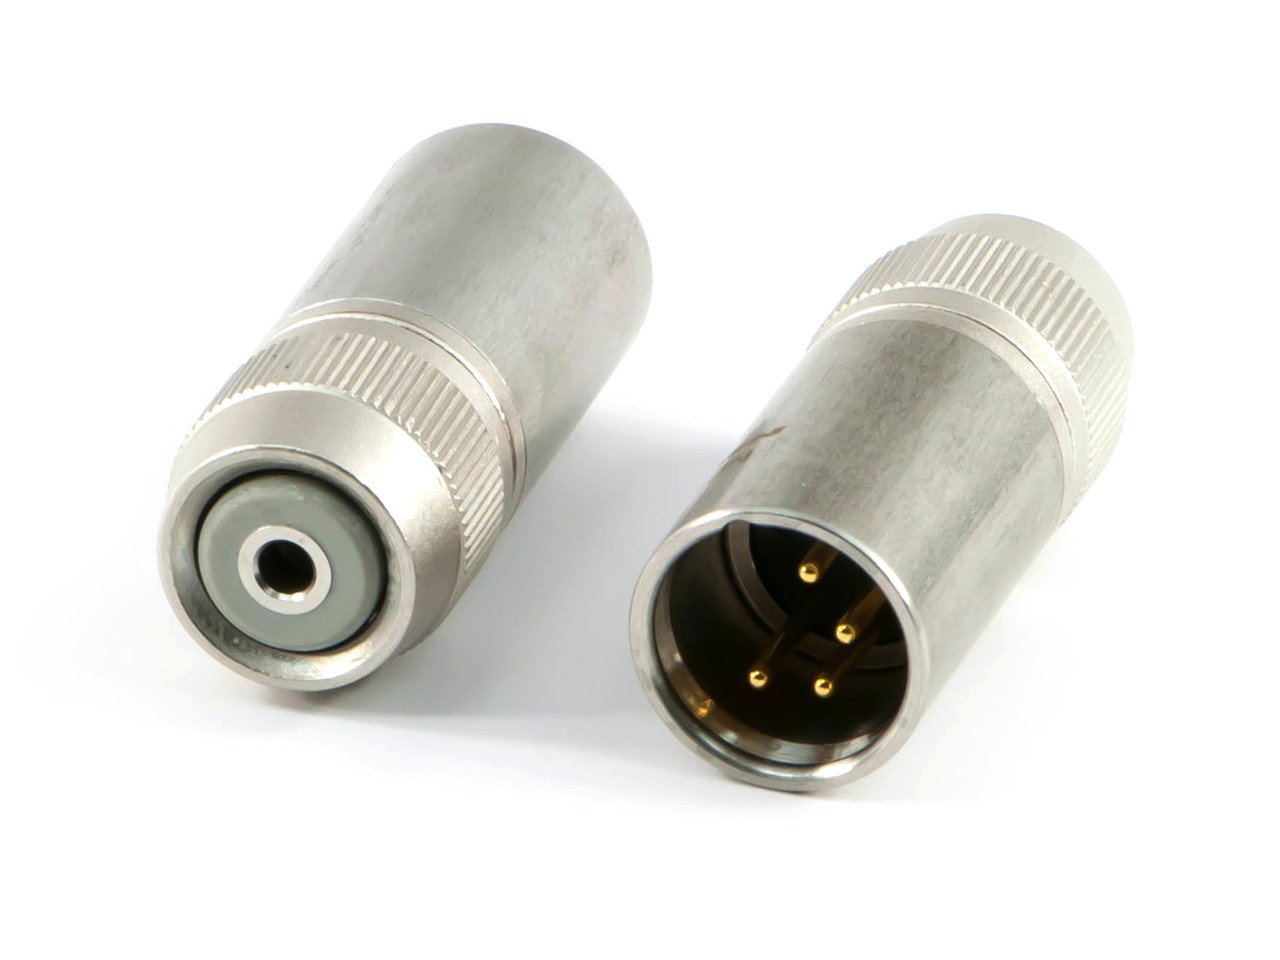 4-Pin XLR Adapter for 2.5mm, 3.5mm, or RSA